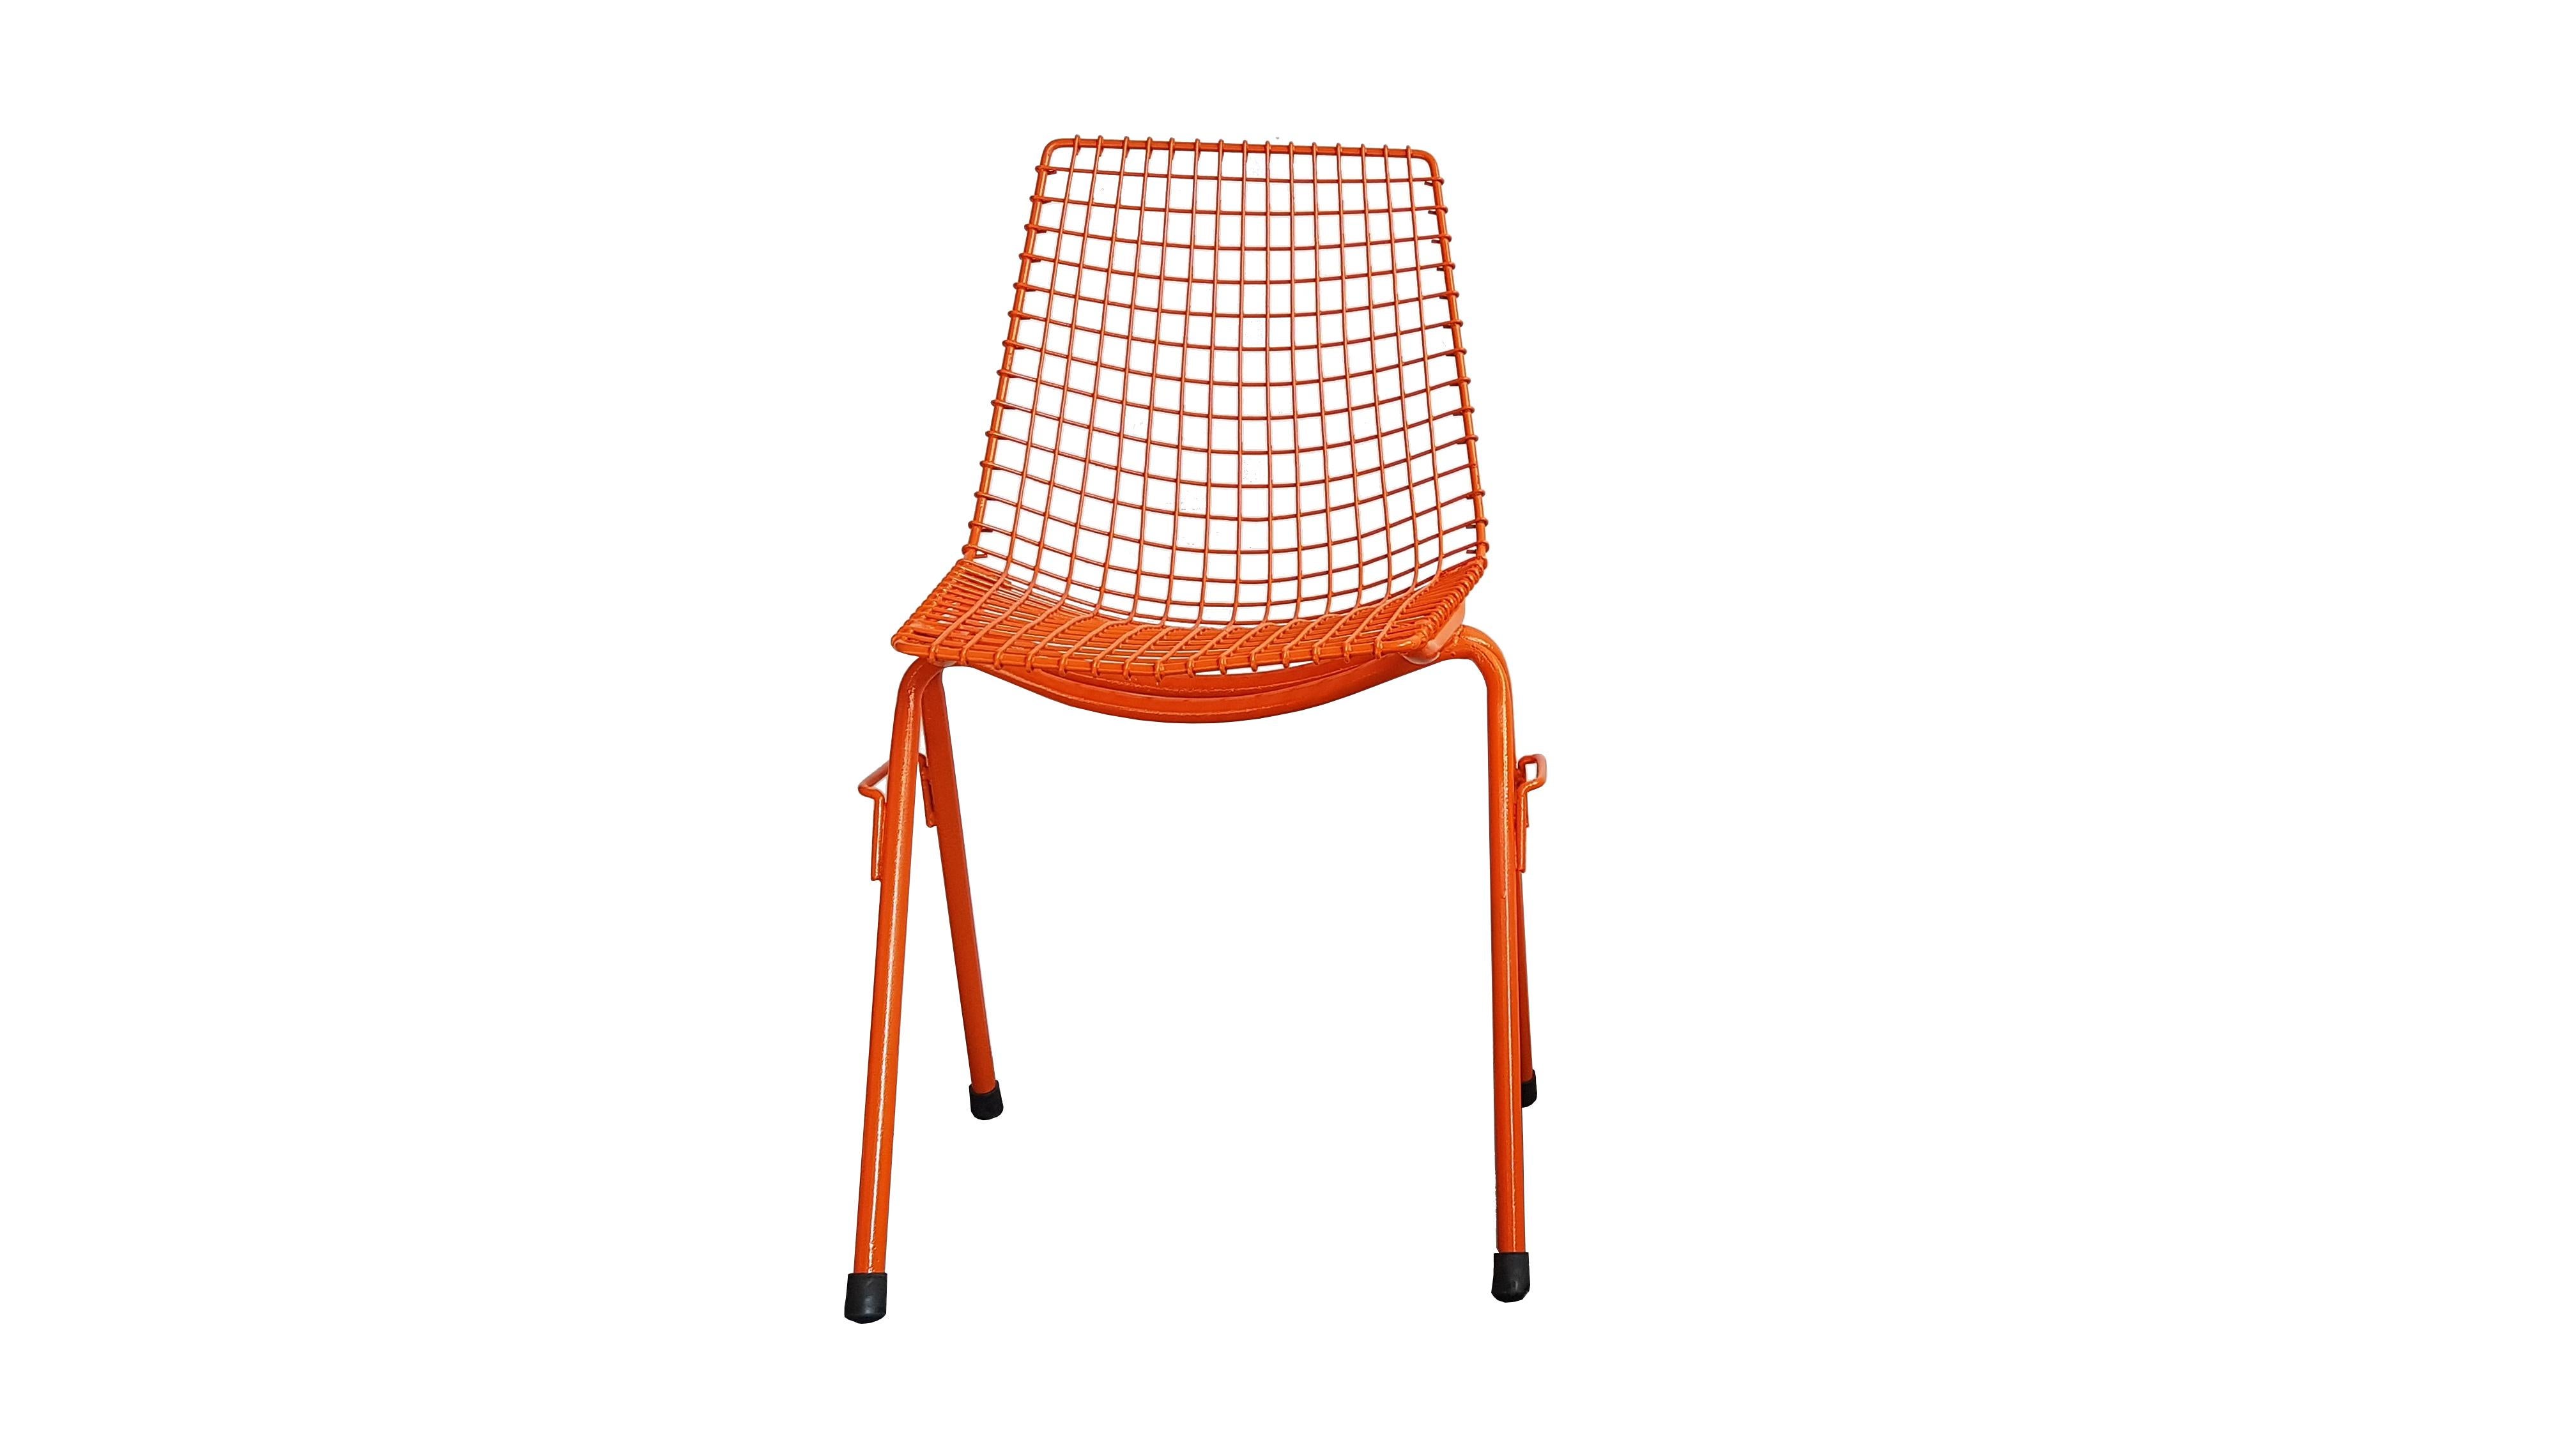 This polish steel chair was designed by Henryk Sztaba in 1968 and produced in the 1970s.